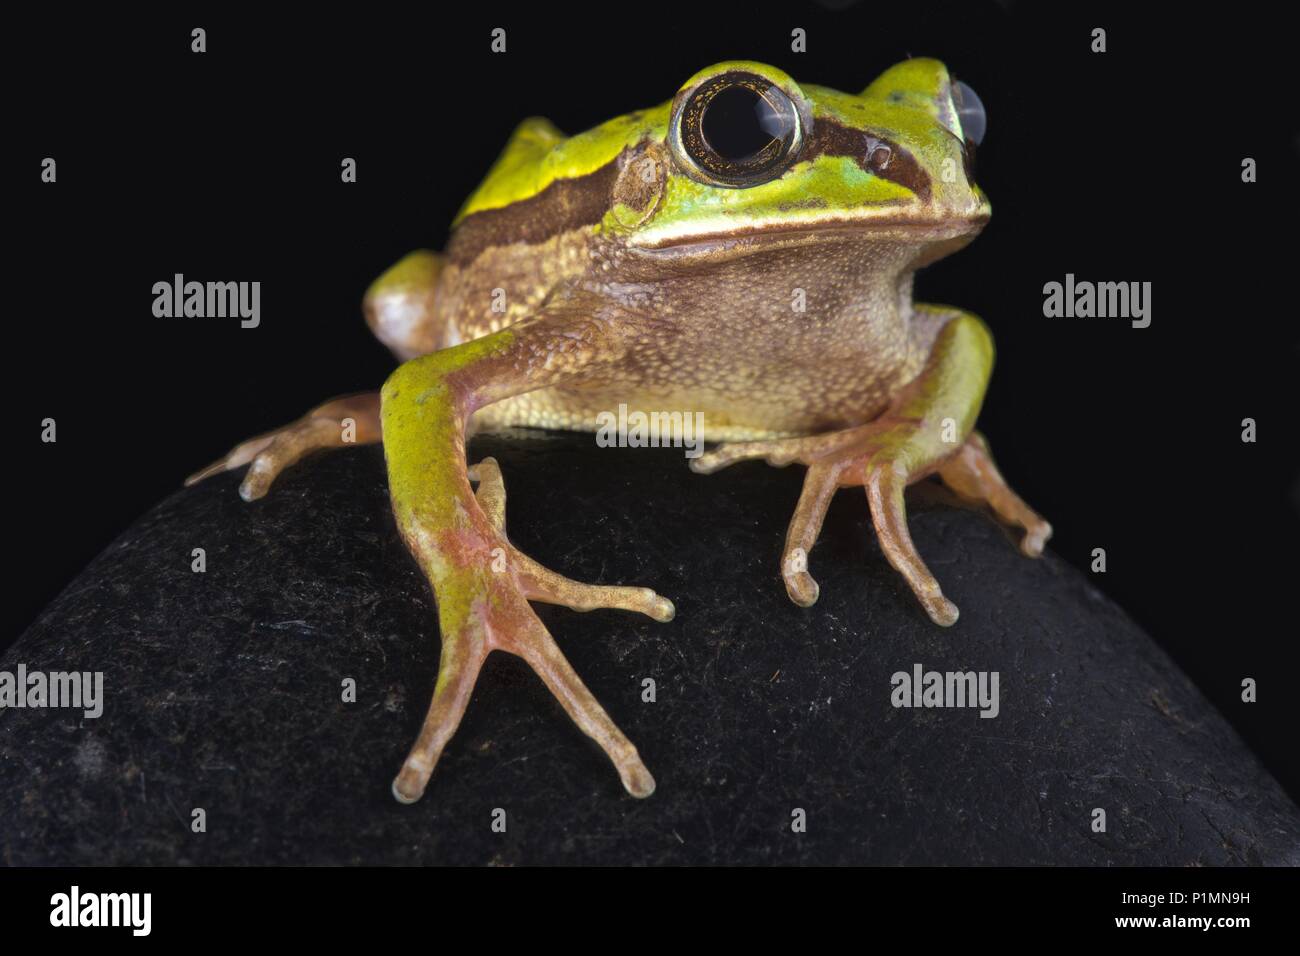 The Big-eyed frog (Leptopelis nordequatorialis)is found on savannas in northern Cameroon. Stock Photo